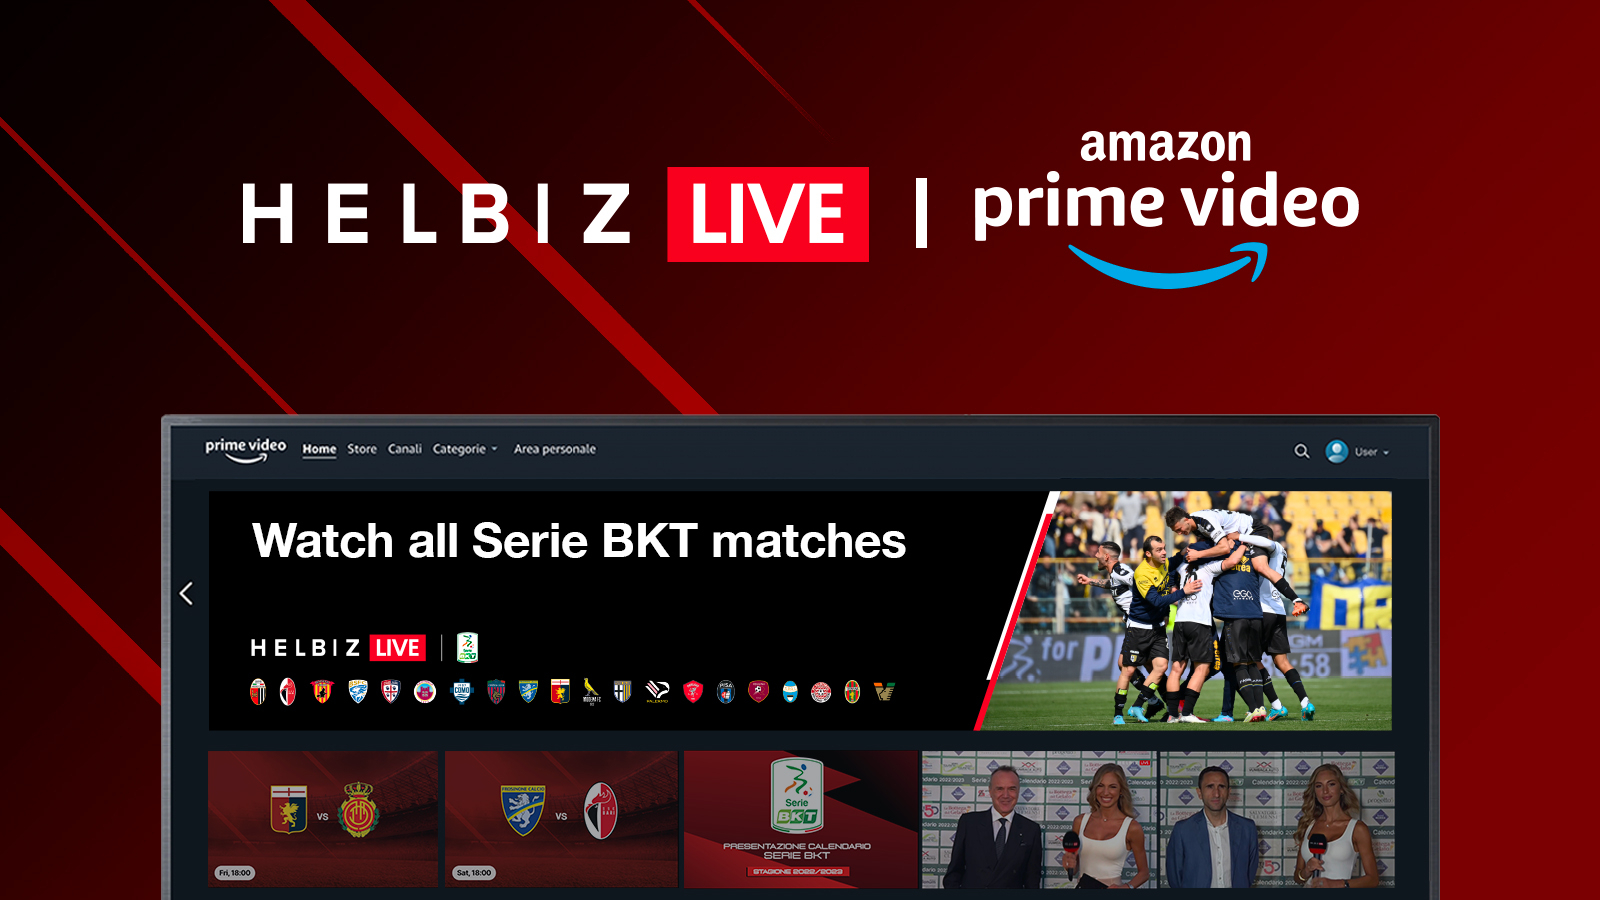 Italia's BKT Series in Helbiz Live is available on Amazon Prime Video